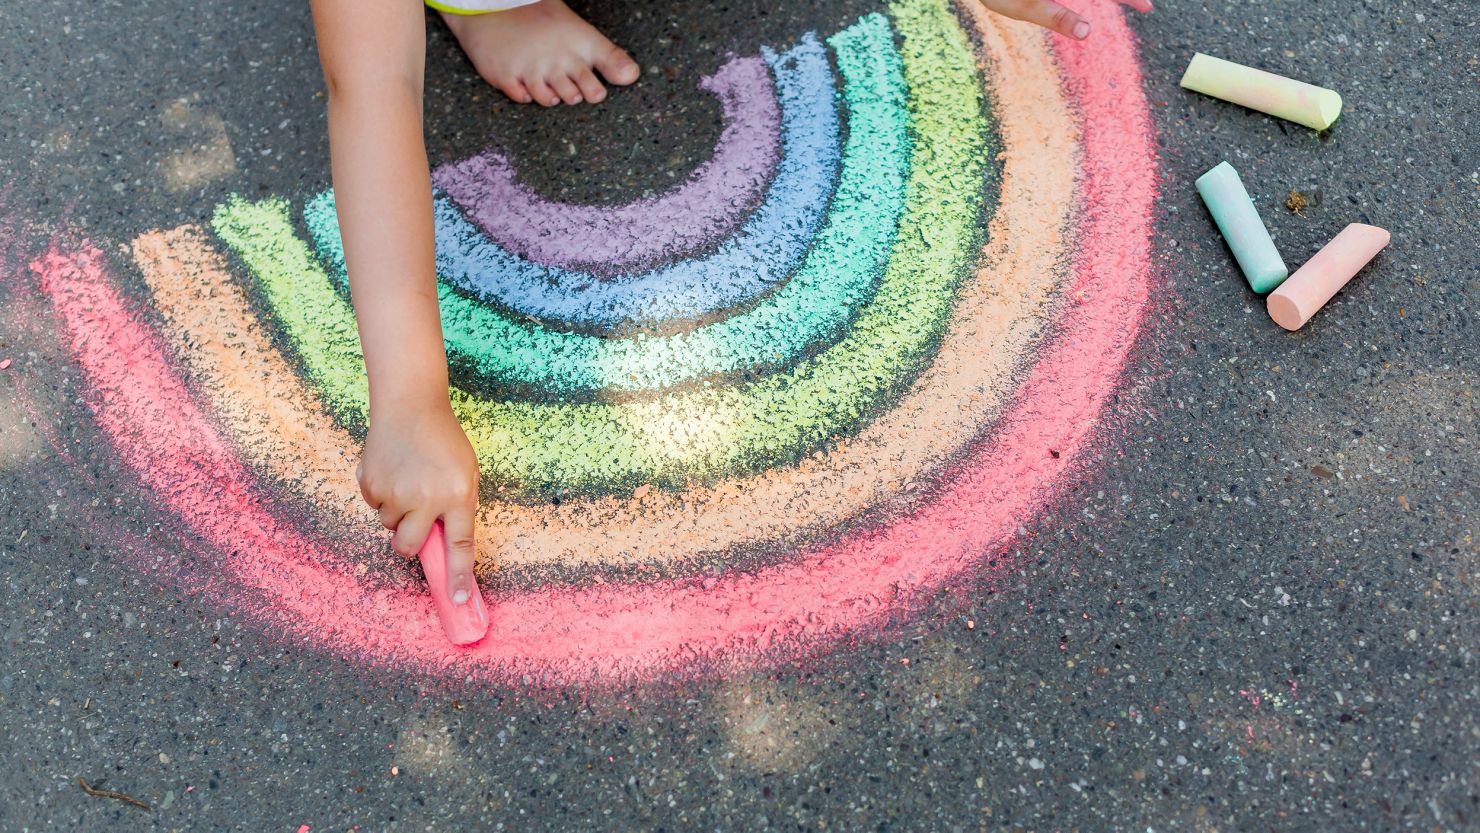 Chalk art ideas: The best outdoor and chalk art projects for kids